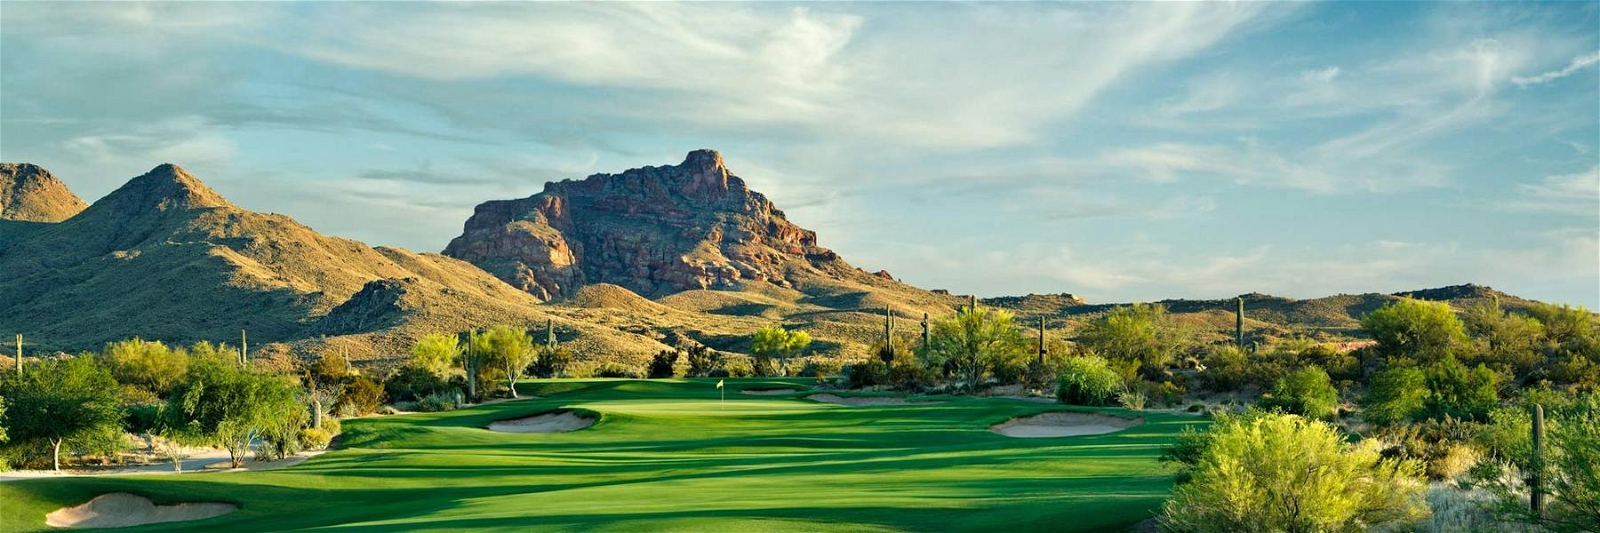 Golf Vacation Package - We-Ko-Pa Stay & Play + Legacy, Eagle Mtn & Desert Canyon from $212!